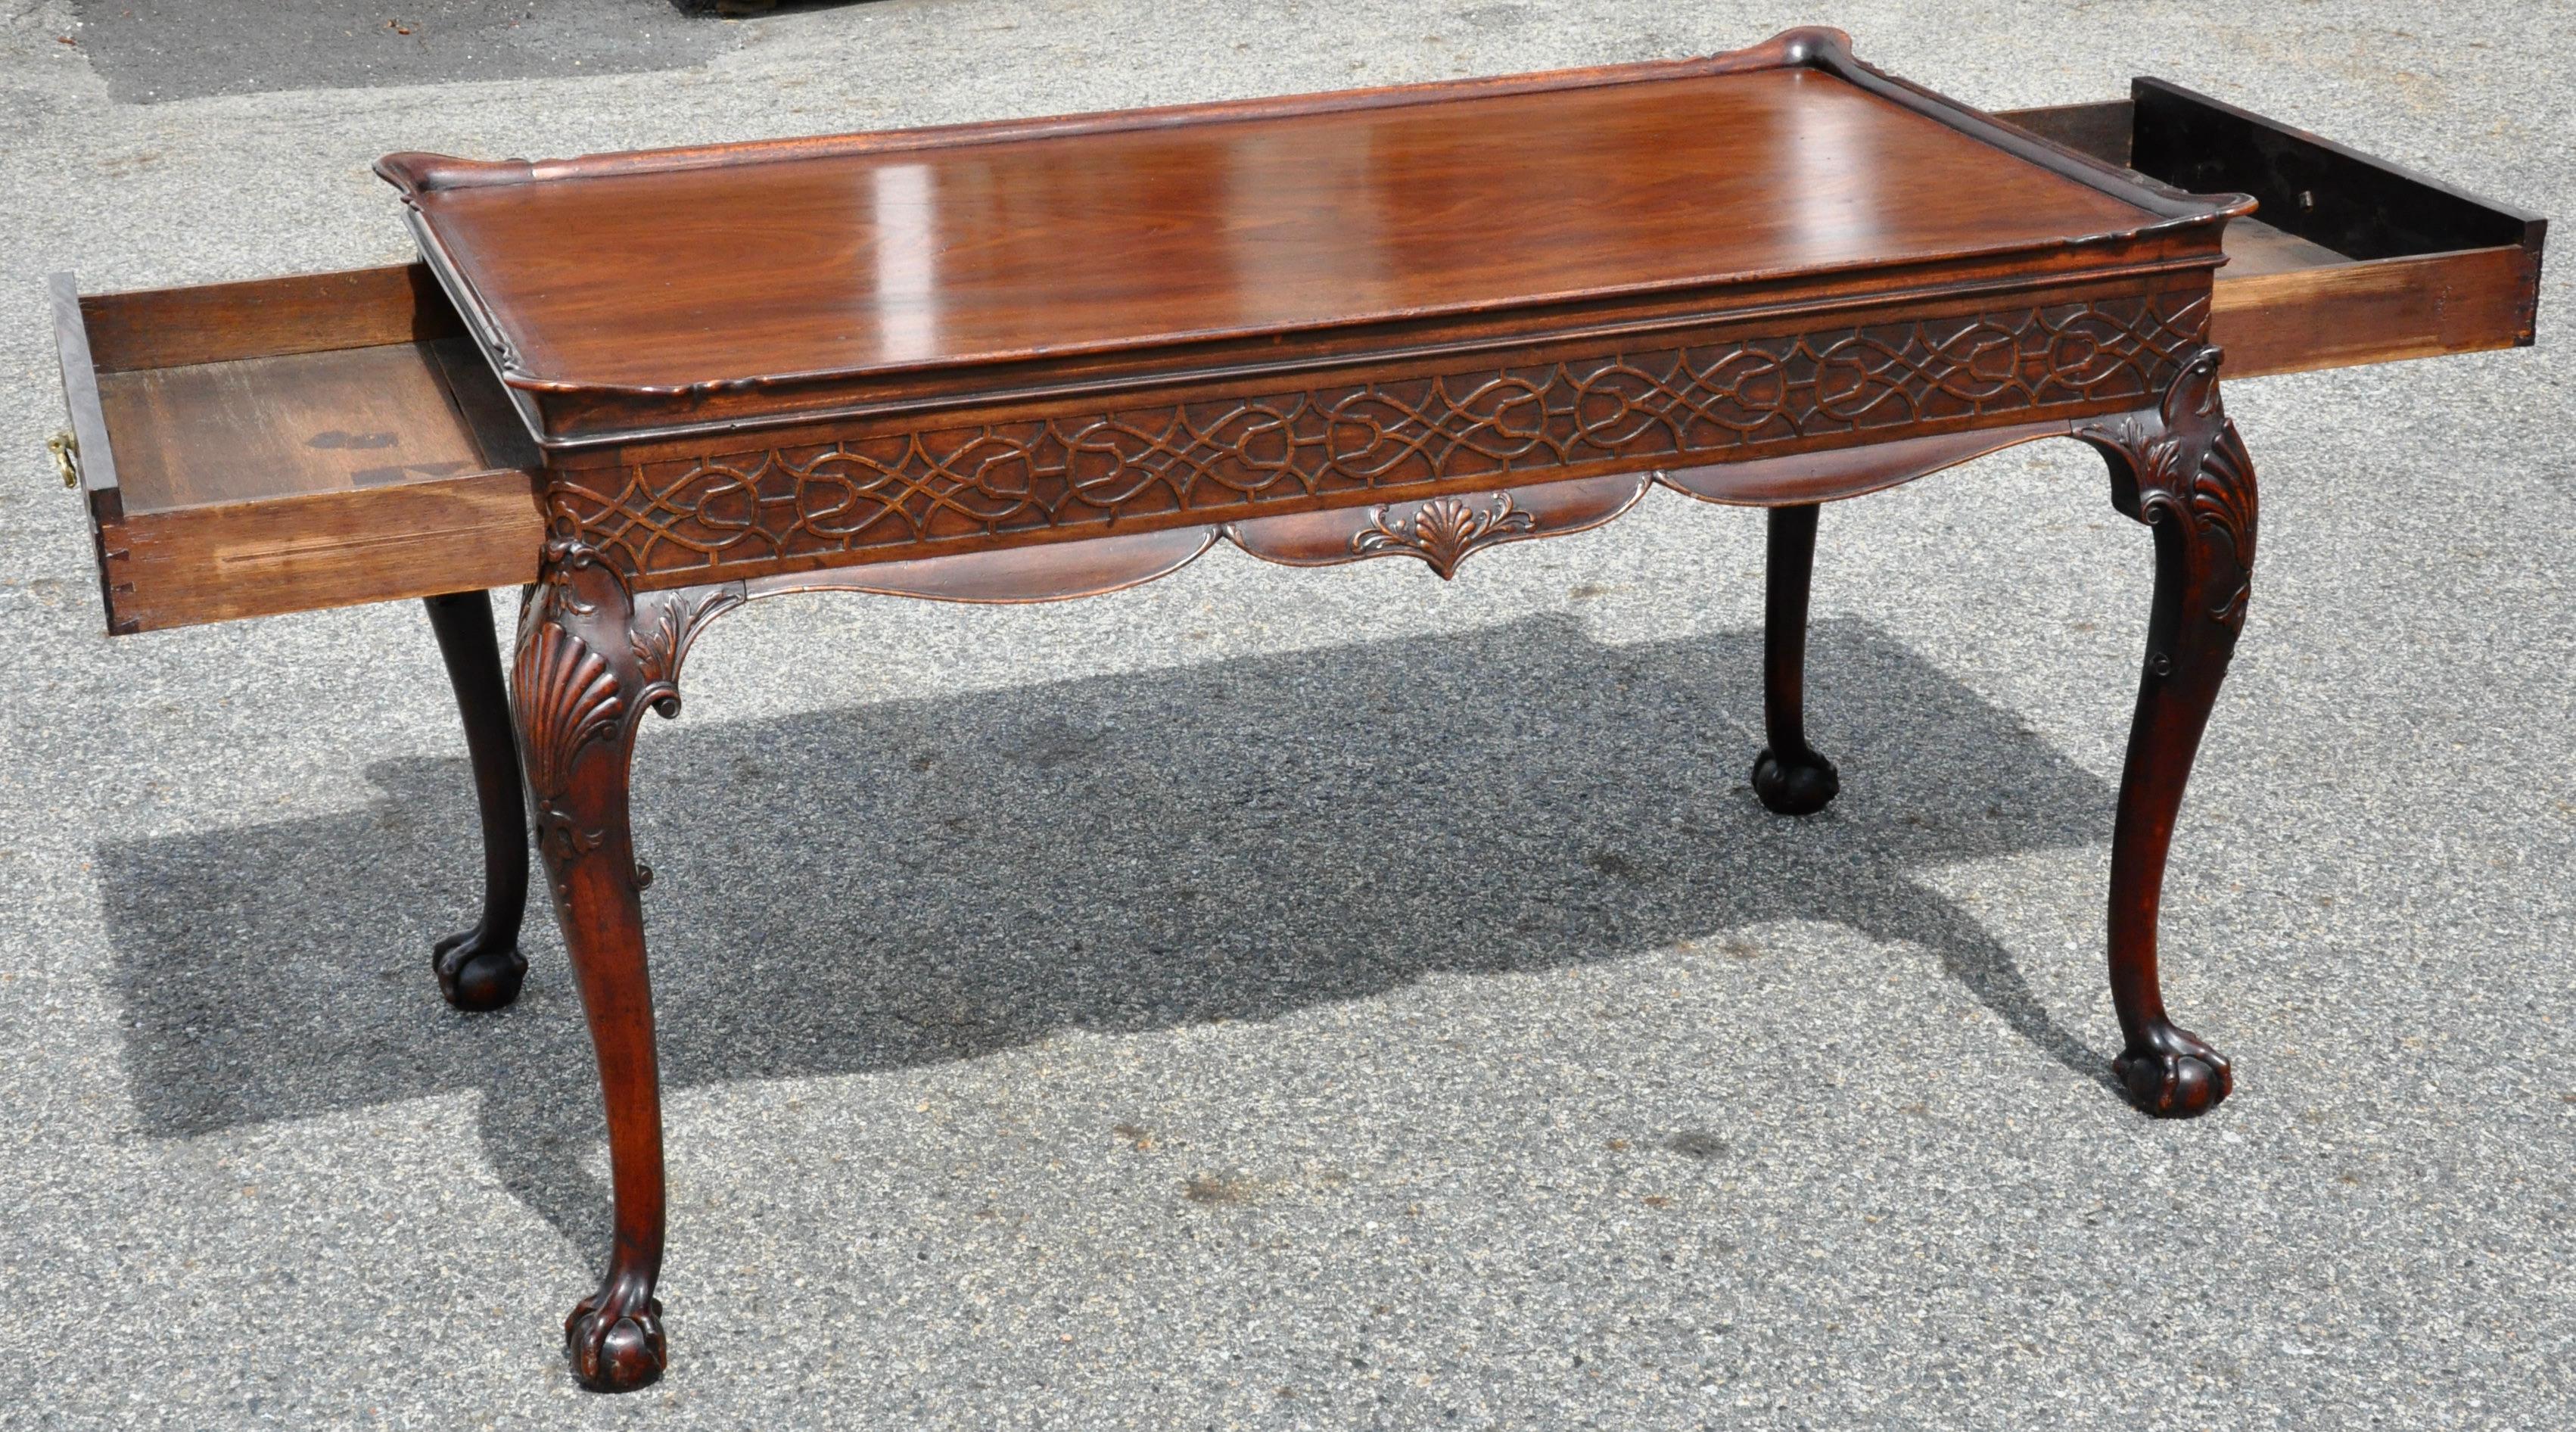 Masterfully worked solid mahogany Chippendale style serving table. Raised edge top with old growth Cuban mahogany boards. Drawers on opposing narrower ends. Carved chinoiserie fretwork in frieze all around. Finished and carved on all four sides.